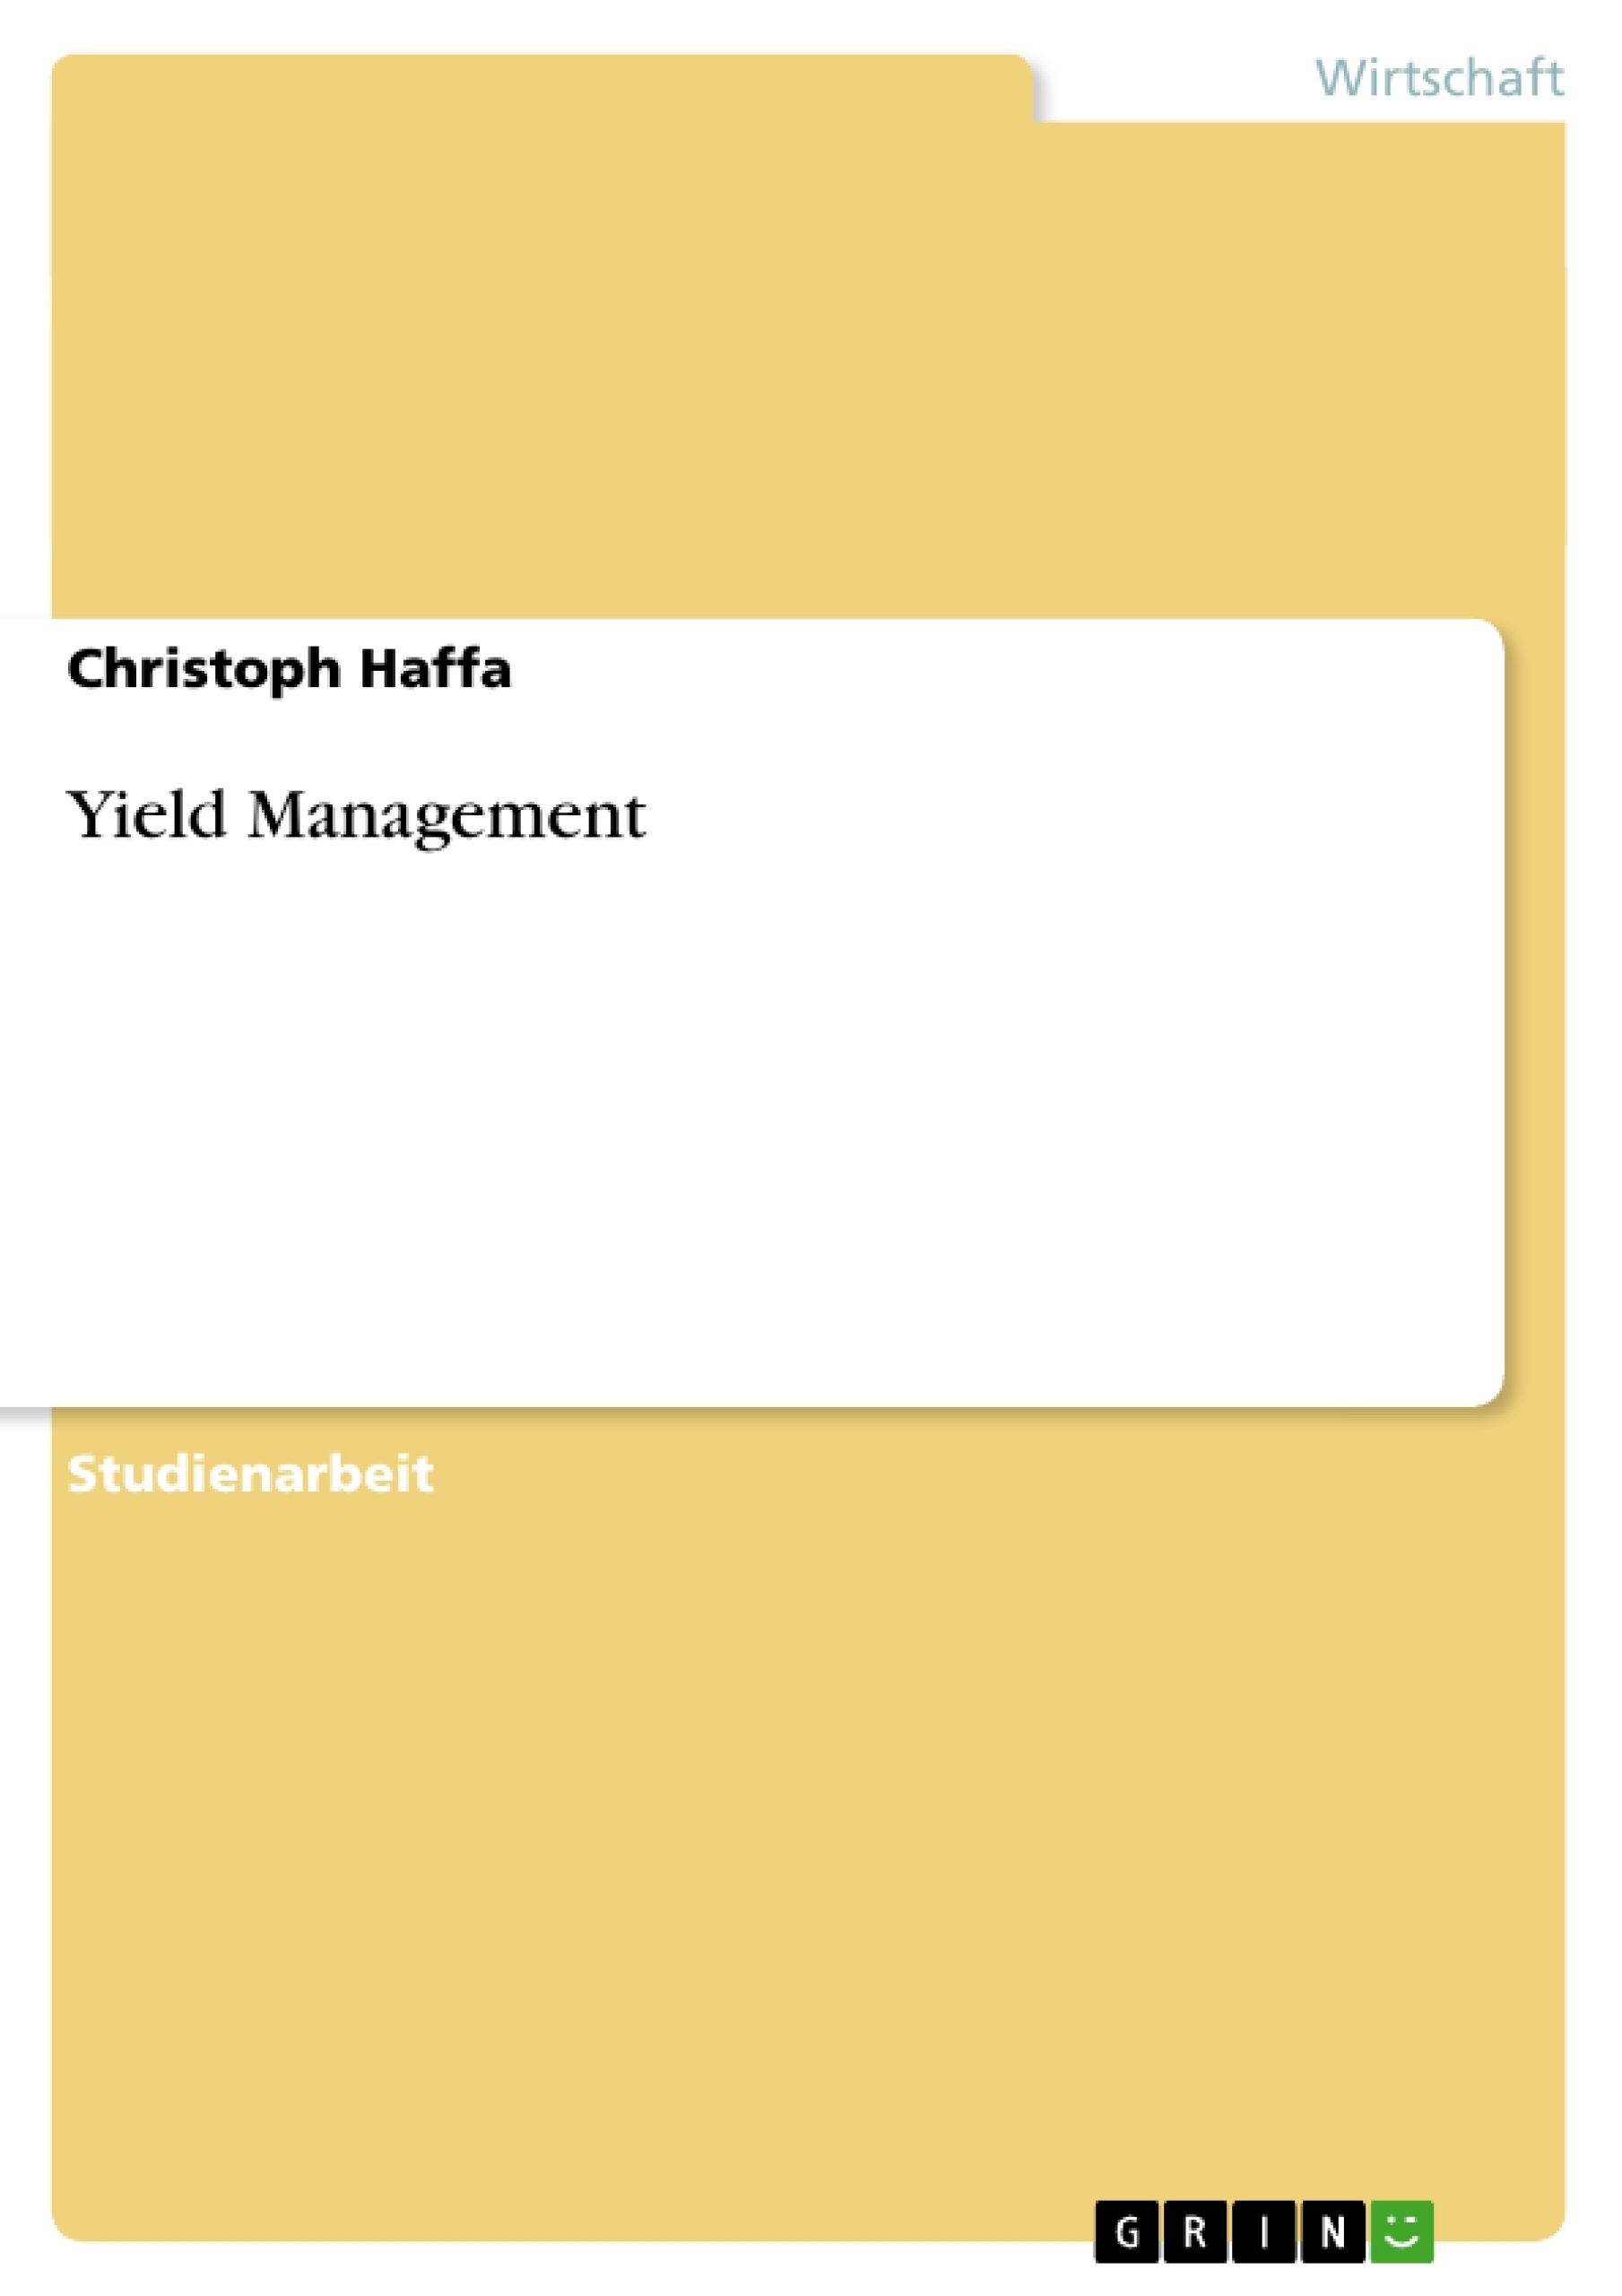 Título: Yield Management